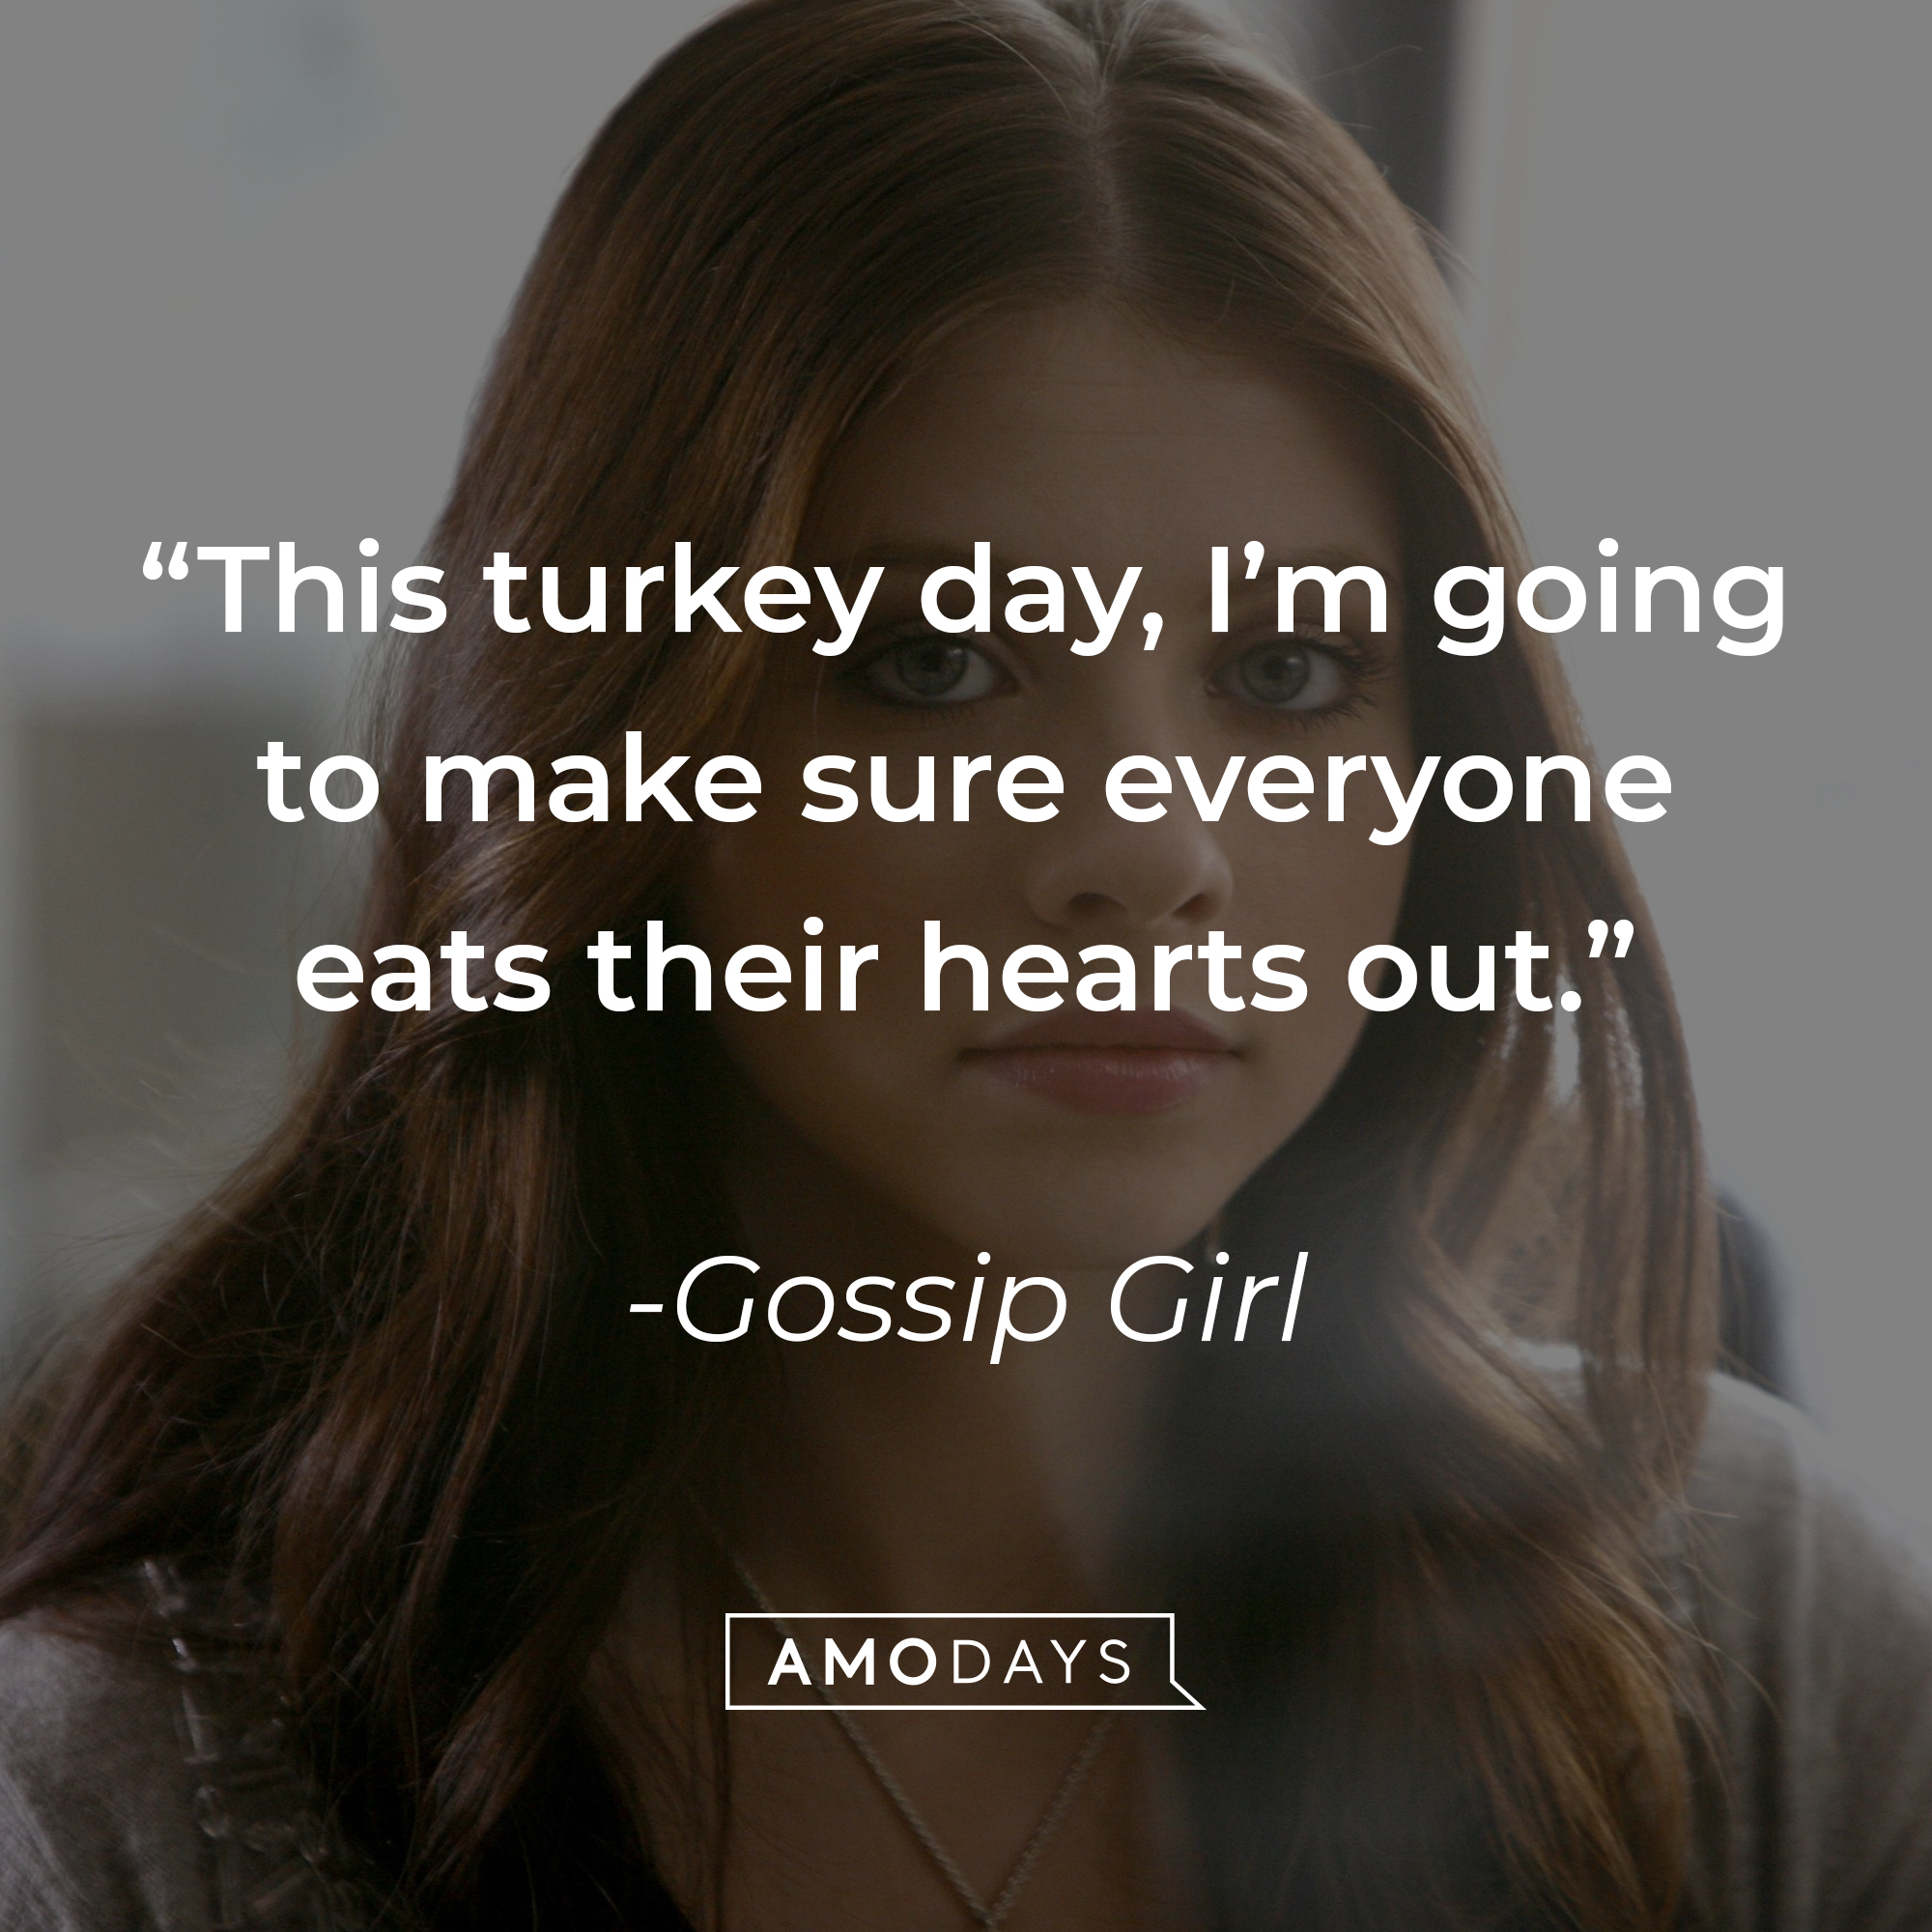 Image from "Gossip Girl" with the quote: "This turkey day, I’m going to make sure everyone eats their hearts out." | Source: facebook.com/GossipGirl